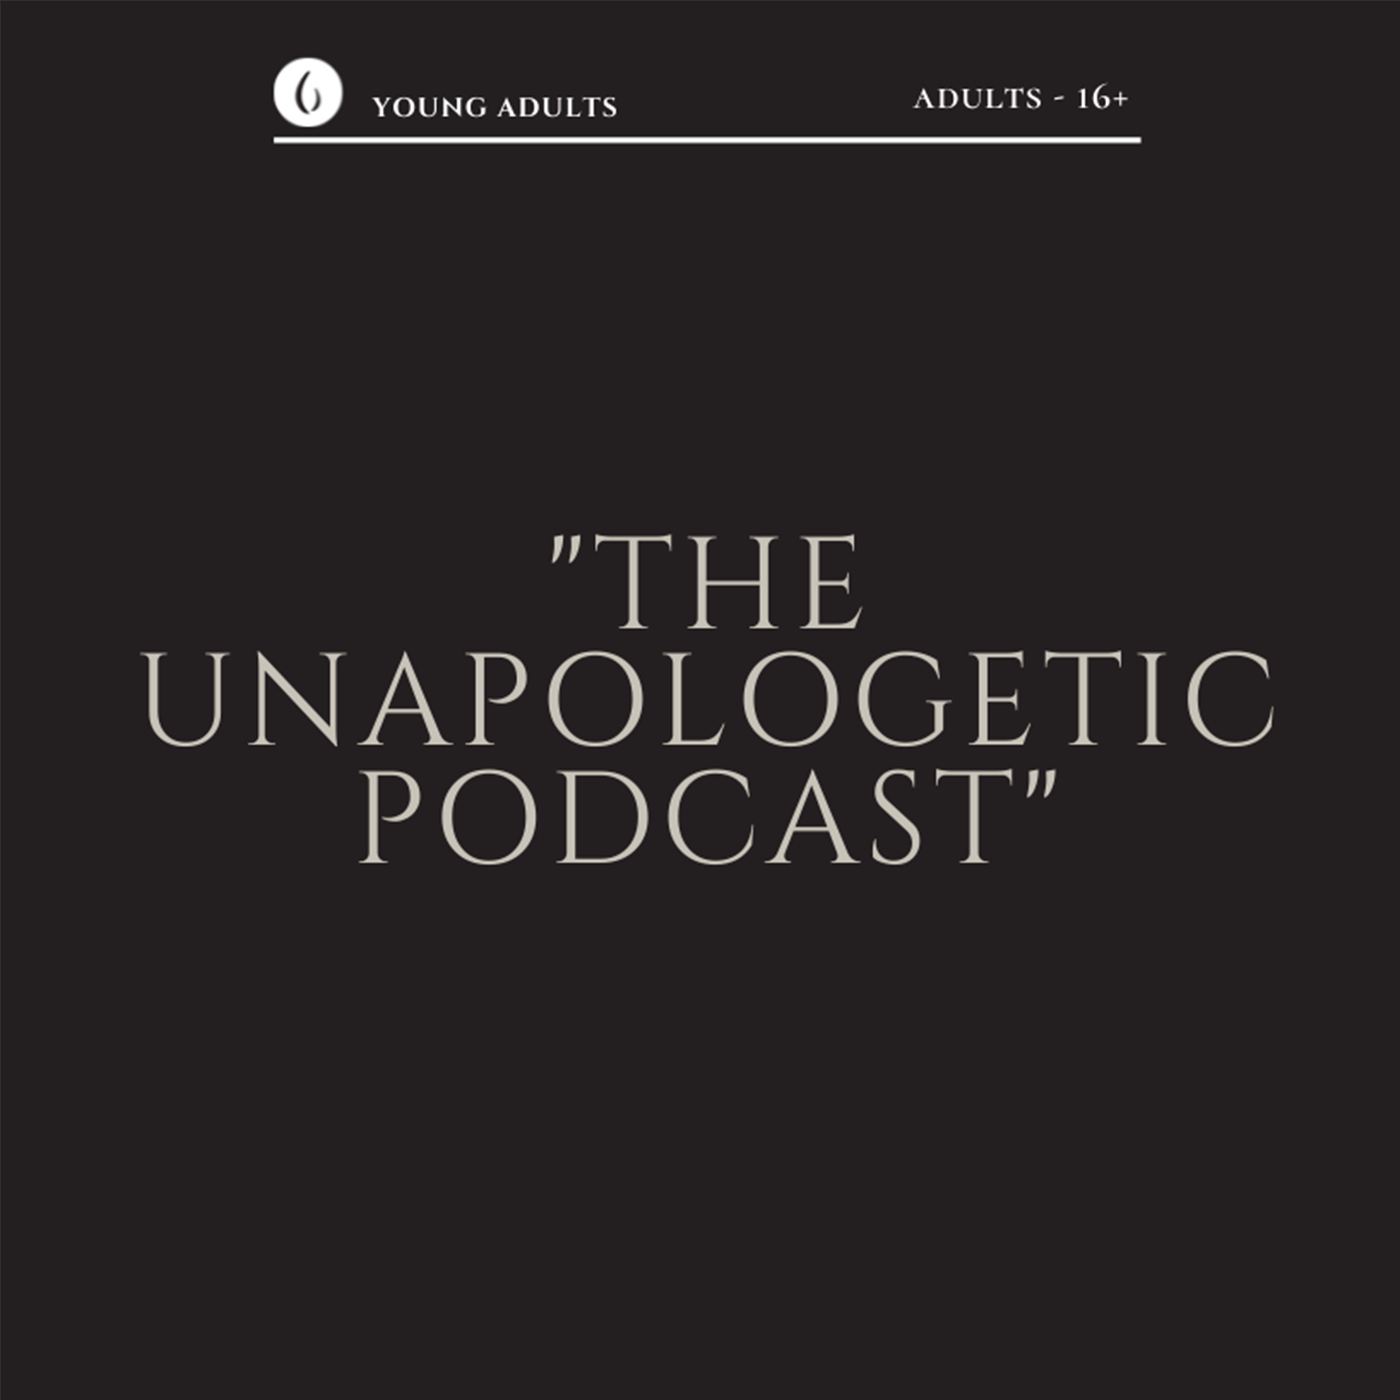 Artwork for The Unapologetic Podcast